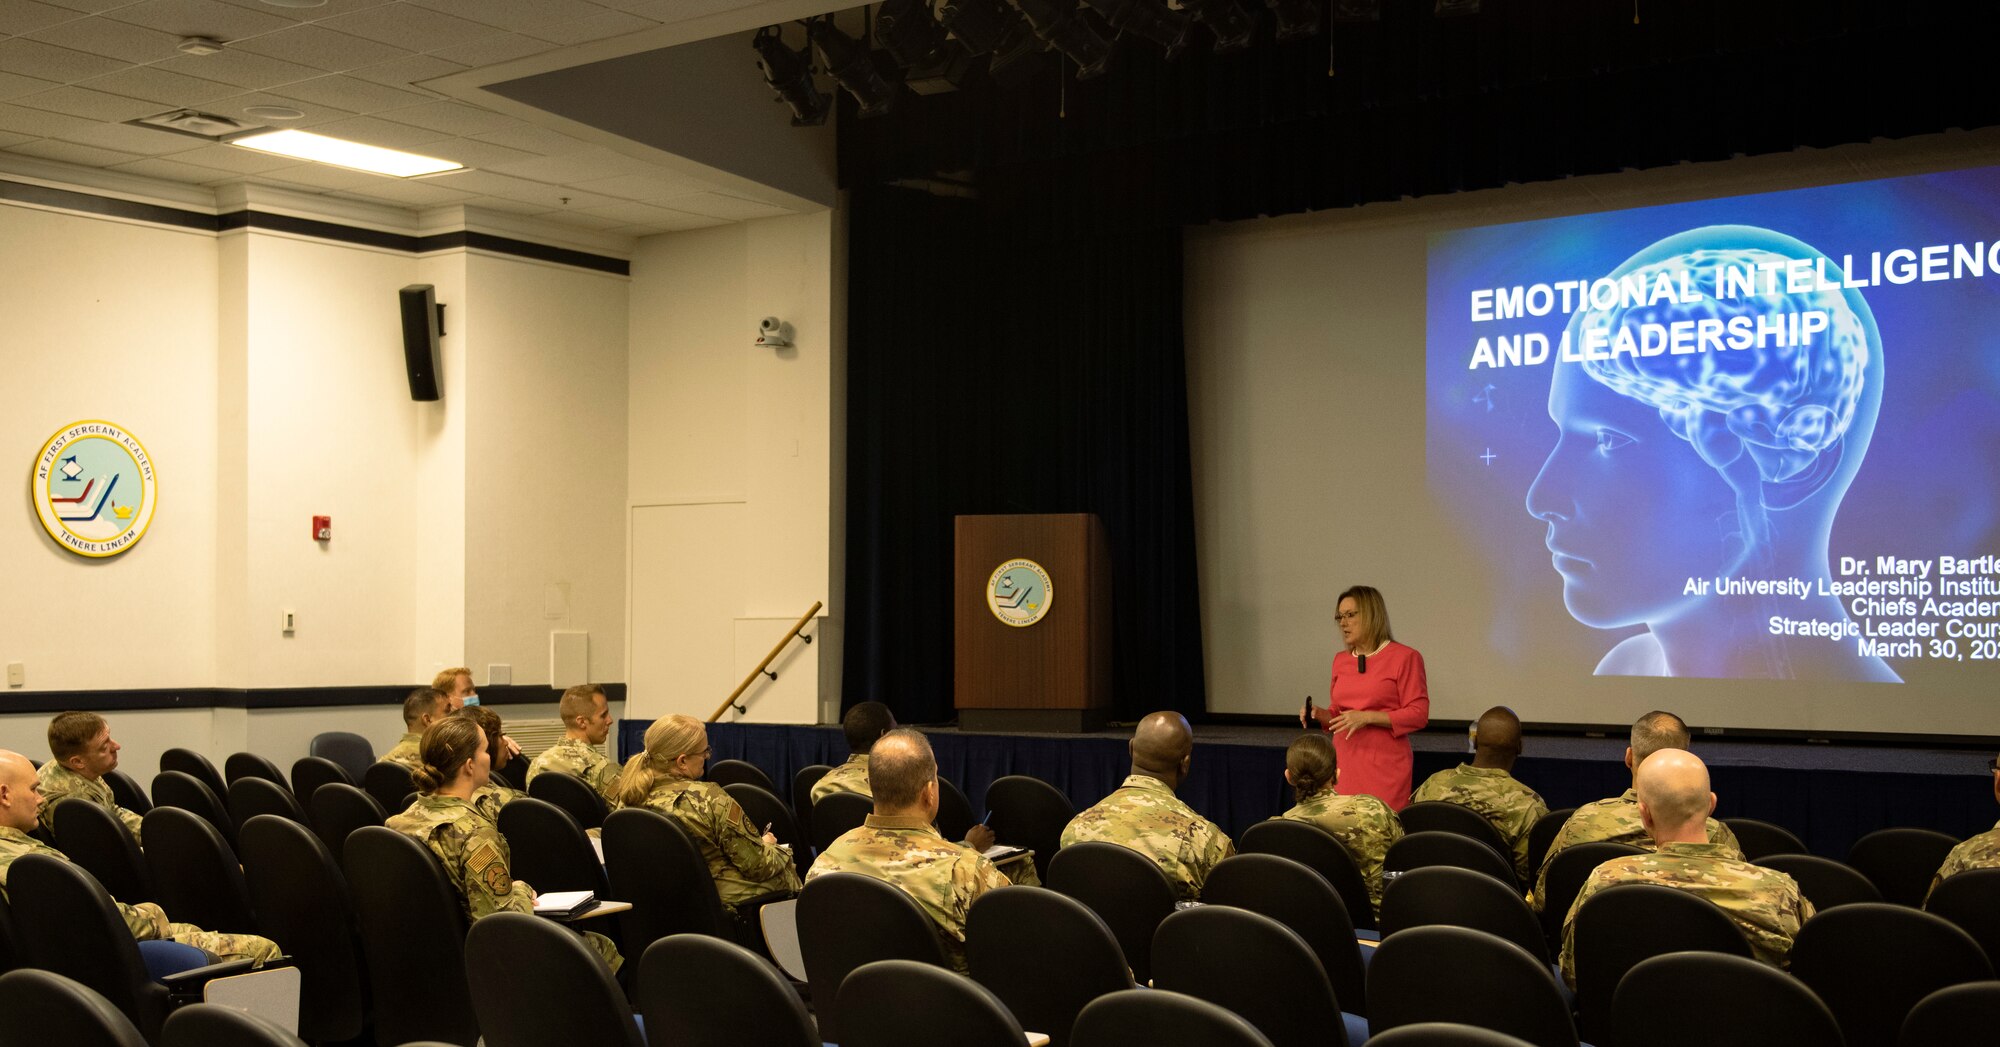 Dr. Mary Bartlett, Professor of Leadership Psychology for the Air University Leadership Institute, briefs a class on emotional intelligence during the Strategic Leader Course Mar. 30, 2022. The course provided knowledge from various senior leaders who spoke on topics like strategic leadership, emotional intelligence, national security and interagency interactions.